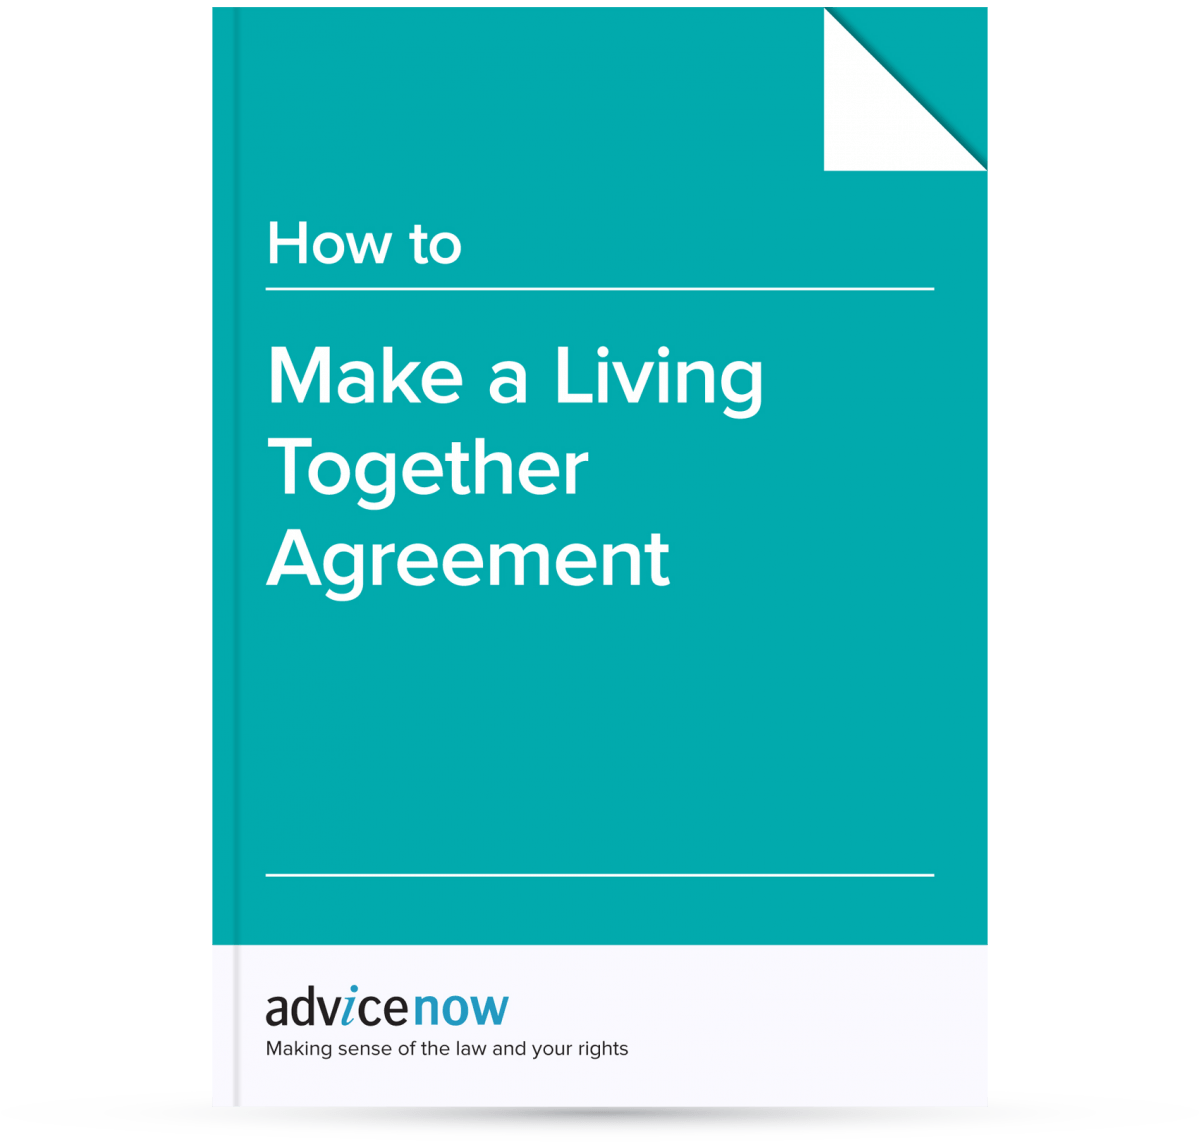 how-to-make-a-living-together-agreement-advicenow